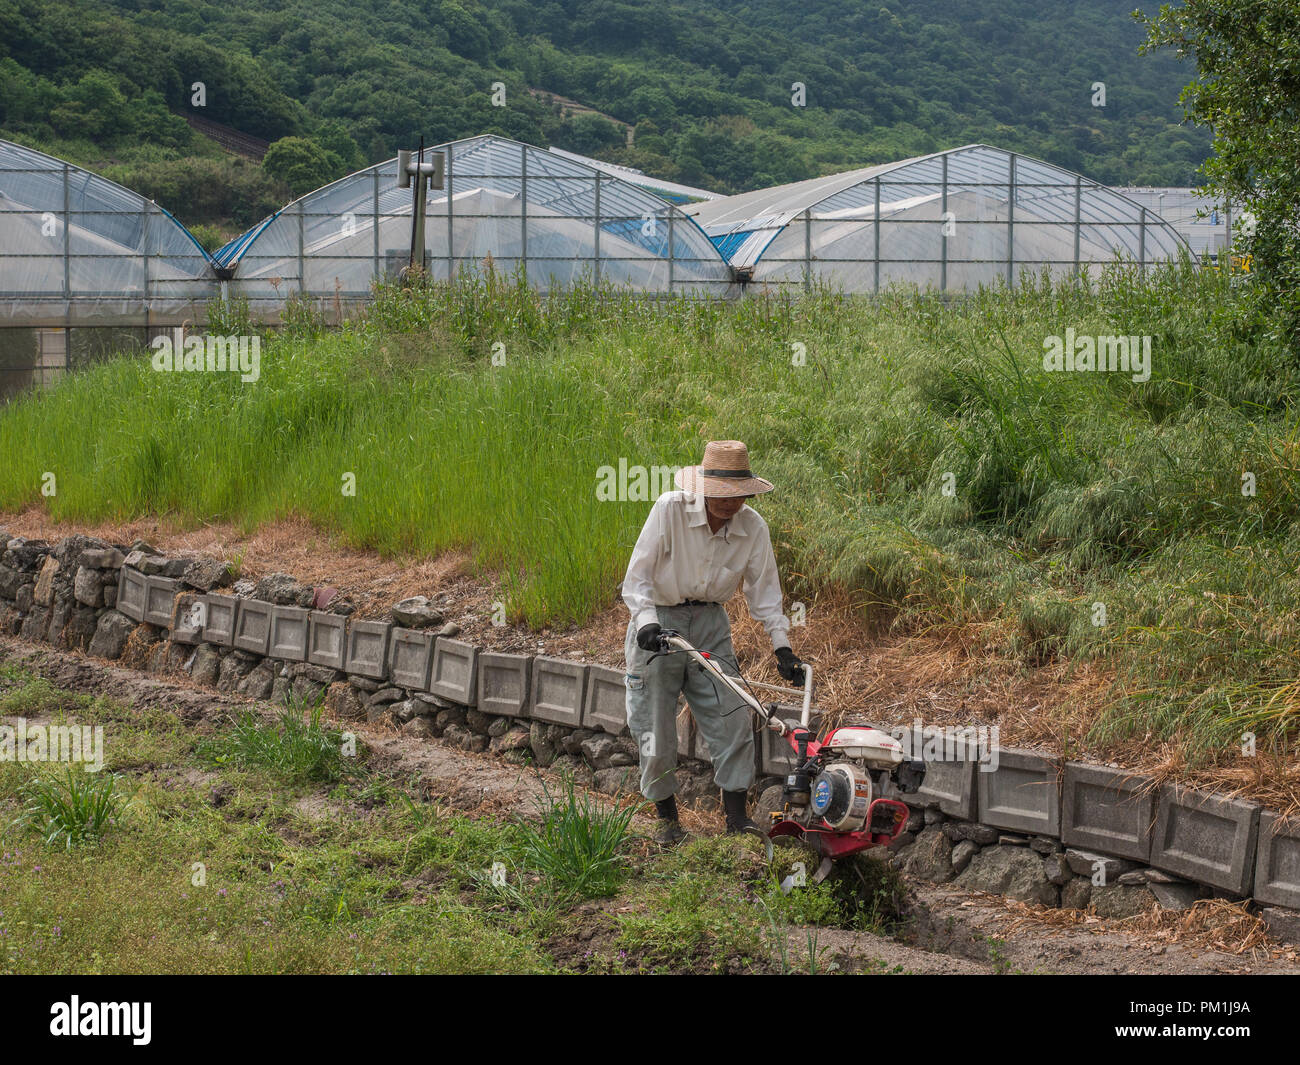 Farmer cultivating field, using hand held rotary hoe cultivator, tunnel house in background, Tadotsu, Kagawa, Japan Stock Photo